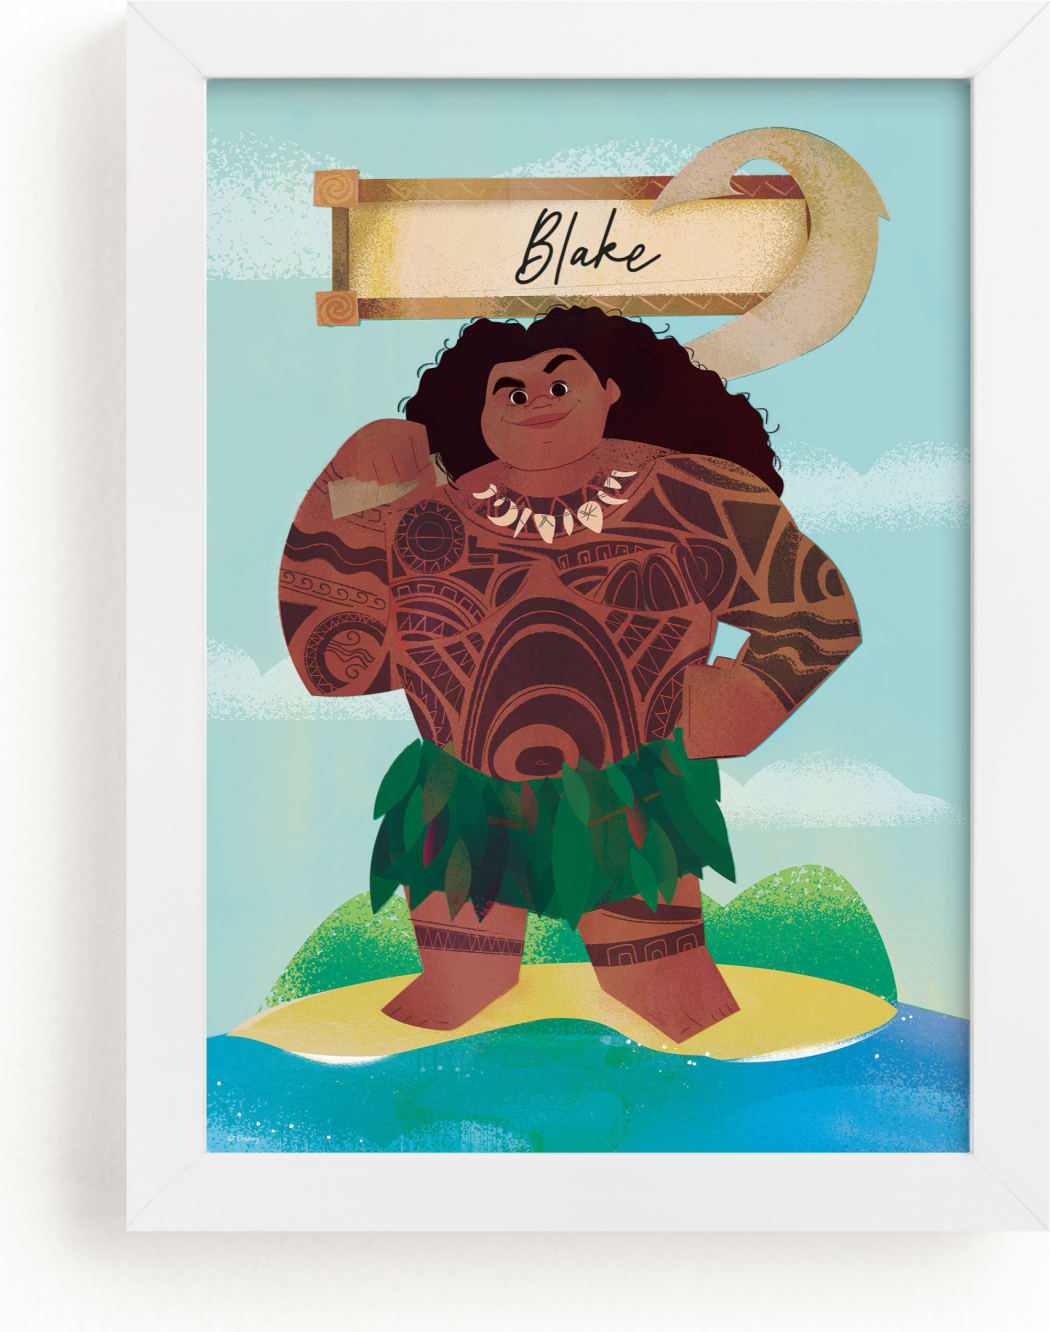 This is a blue disney art by Lori Wemple called Maui the Wayfinder from Disney's Moana.